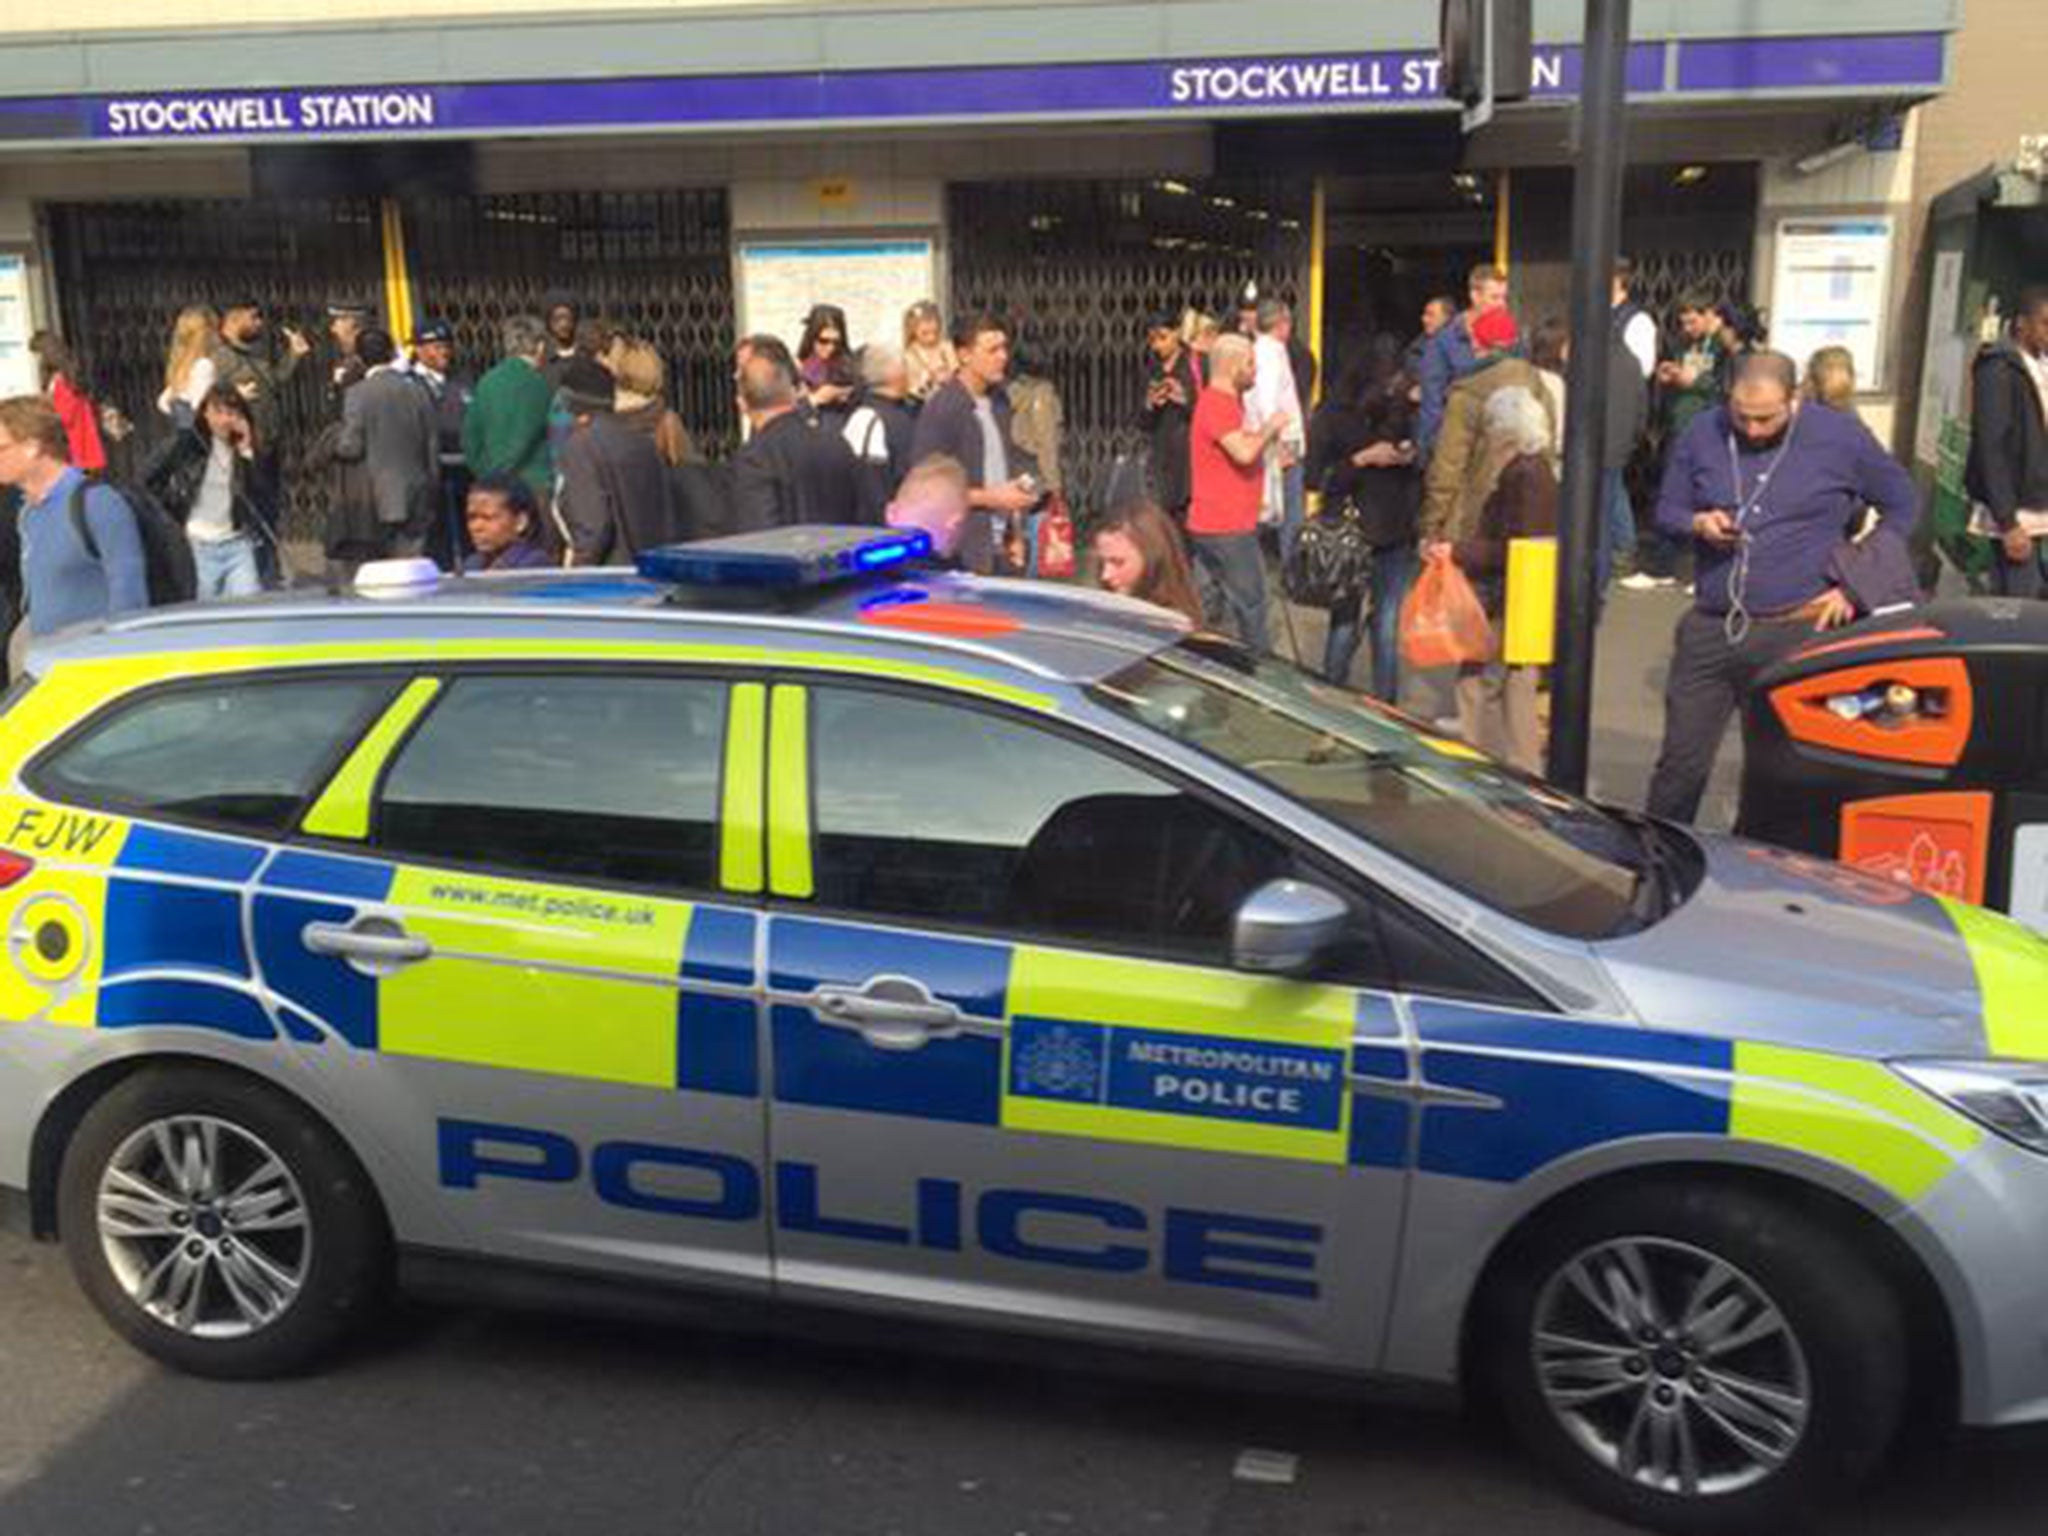 Stockwell London Underground station was closed after the man was hit by a train. Photo: Emily Shackleton